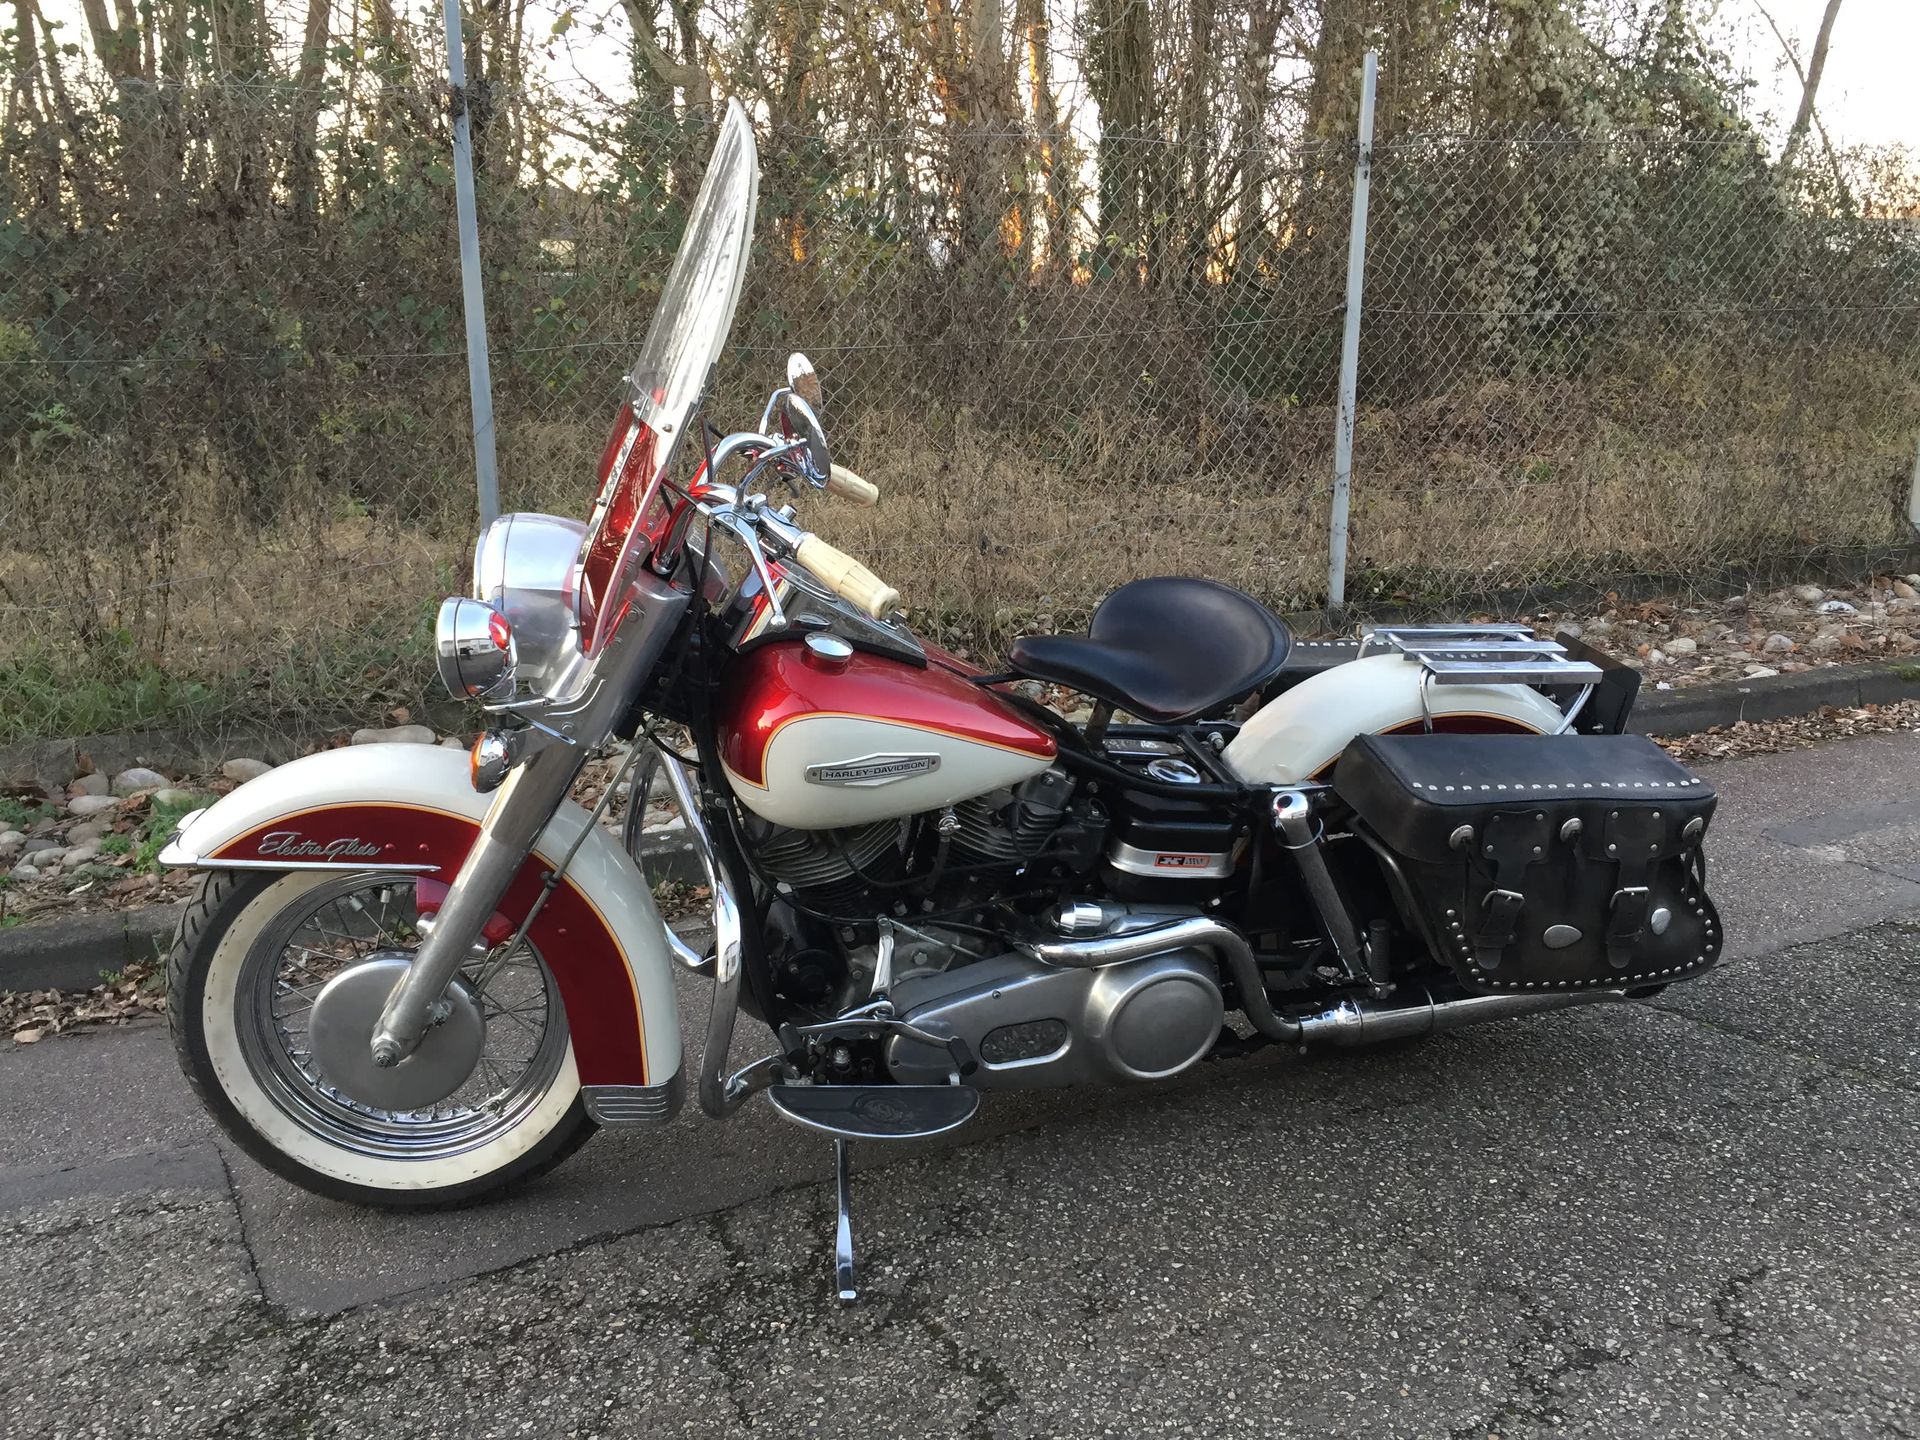 1968 Harley Davidson Early Shovel The bike has been fully restored, and has done&hellip;